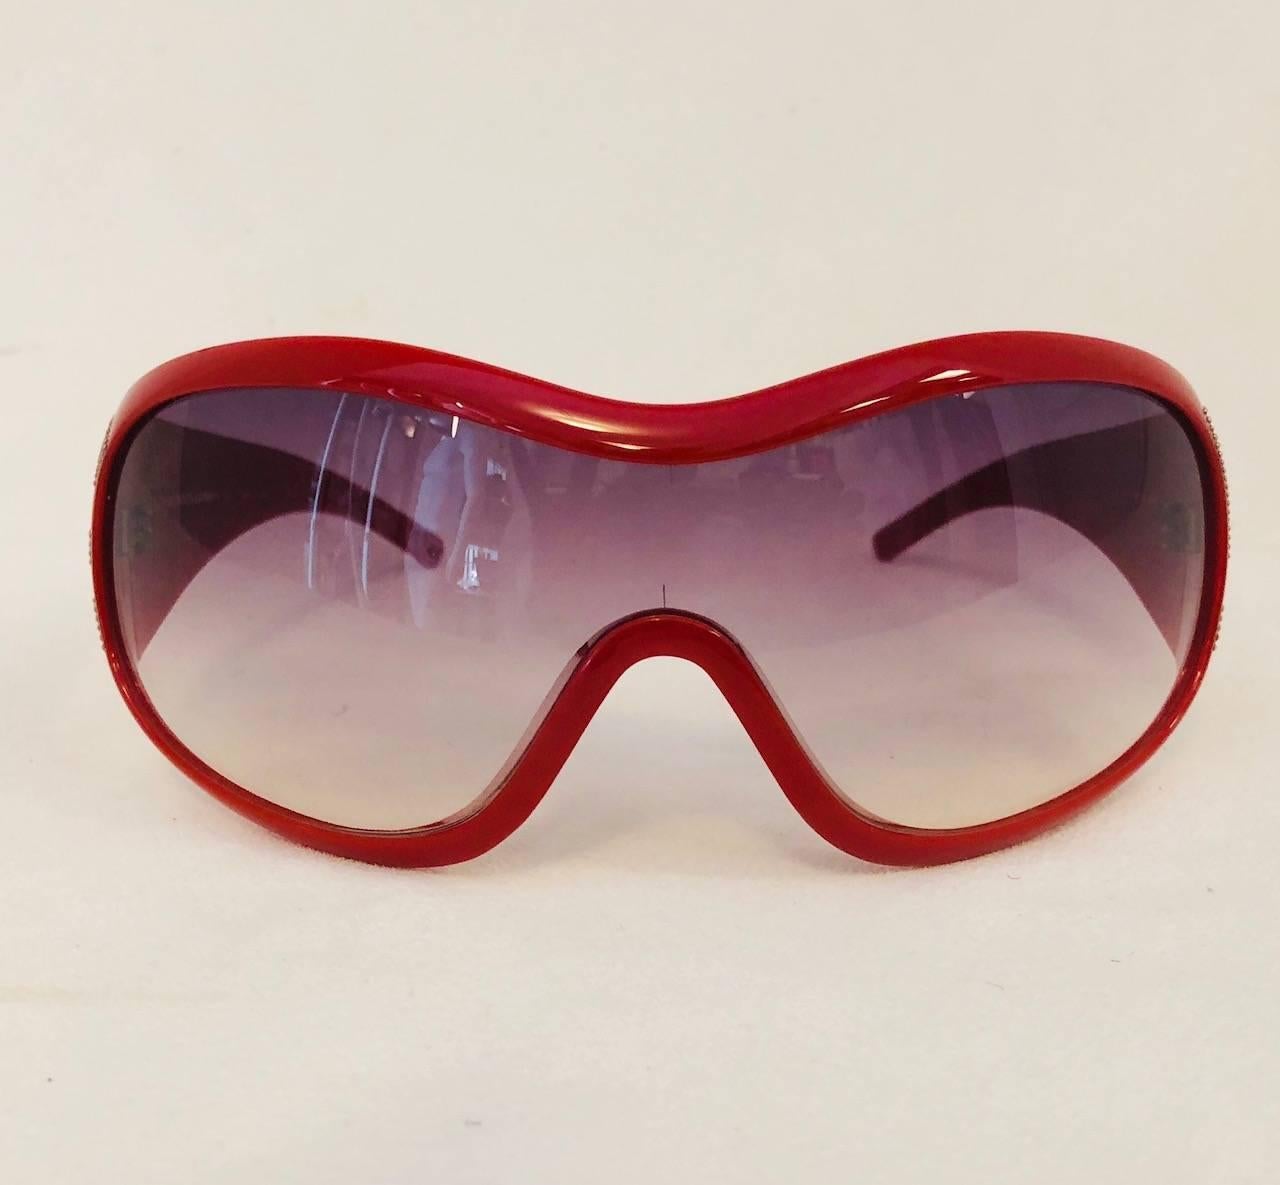 Men's delicious D&G Dolce & Gabbana oversize wrap glasses in hot red with D & G logo in silver raised pin dots on the temples.  Fun fashion statement.  Please read condition comments and refer to photos.  Made in Italy.  They measure 5.50 inches